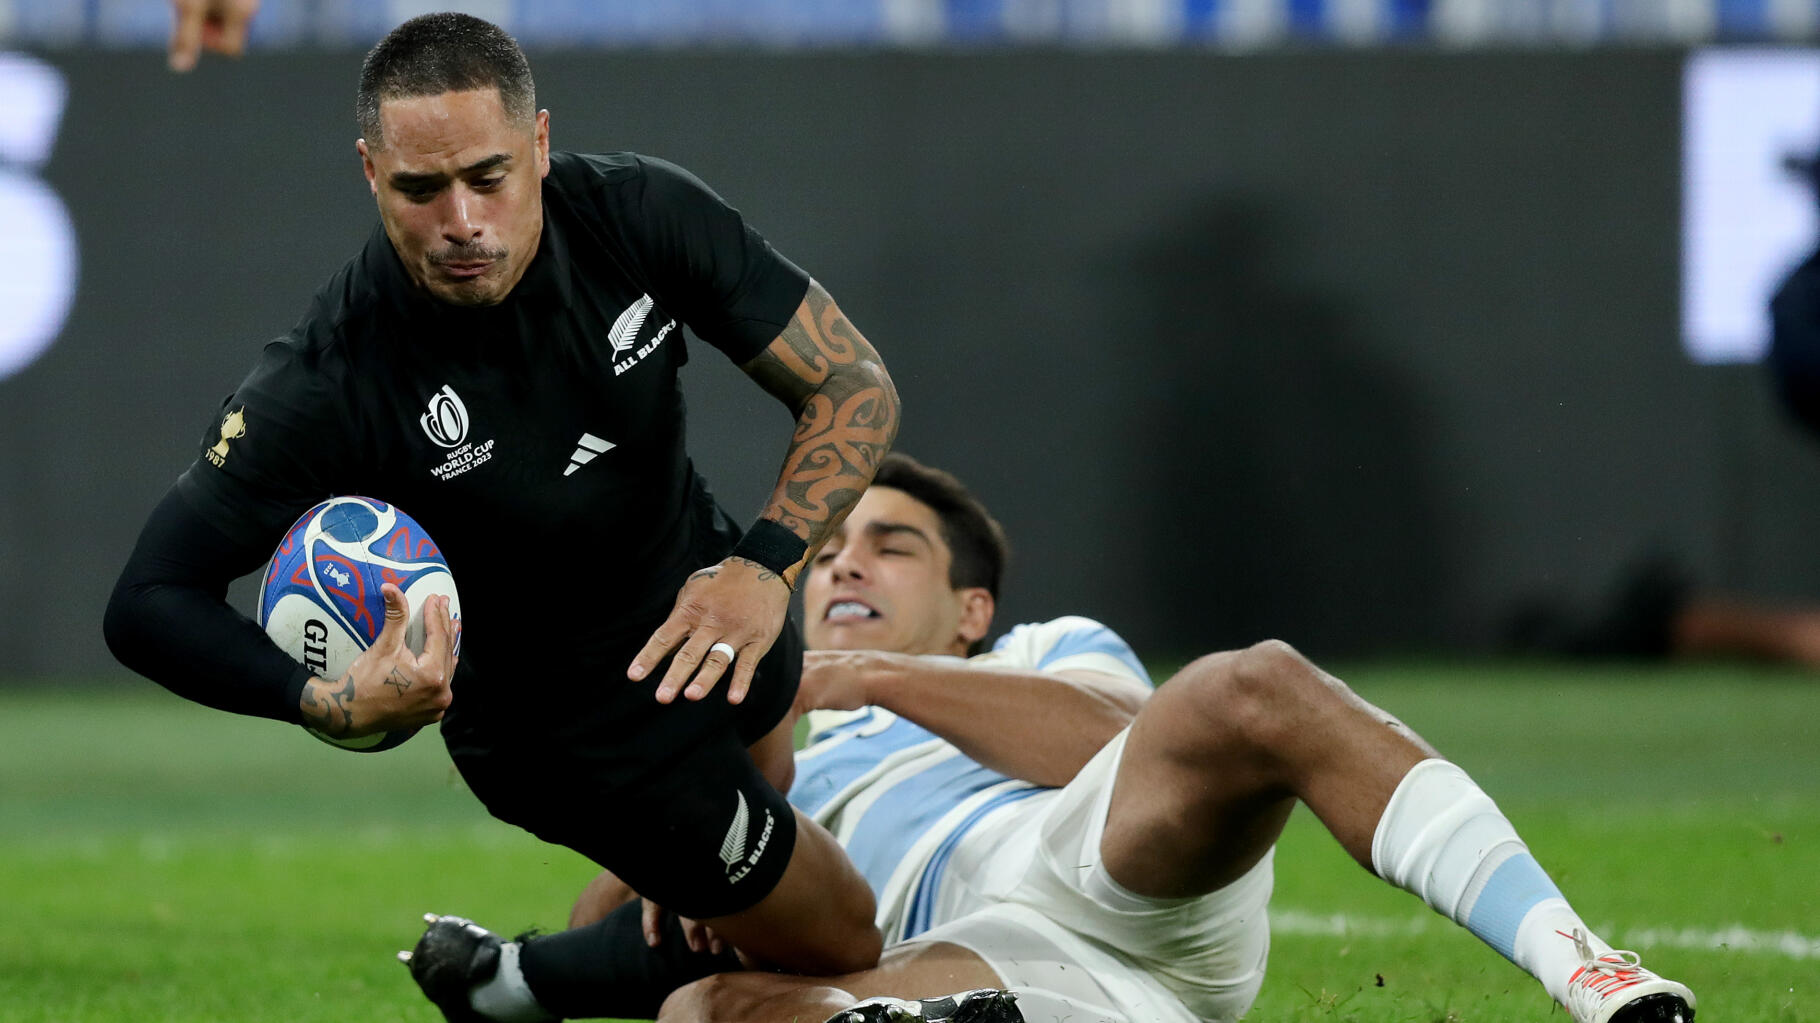 New Zealand defeats Argentina and reaches the final